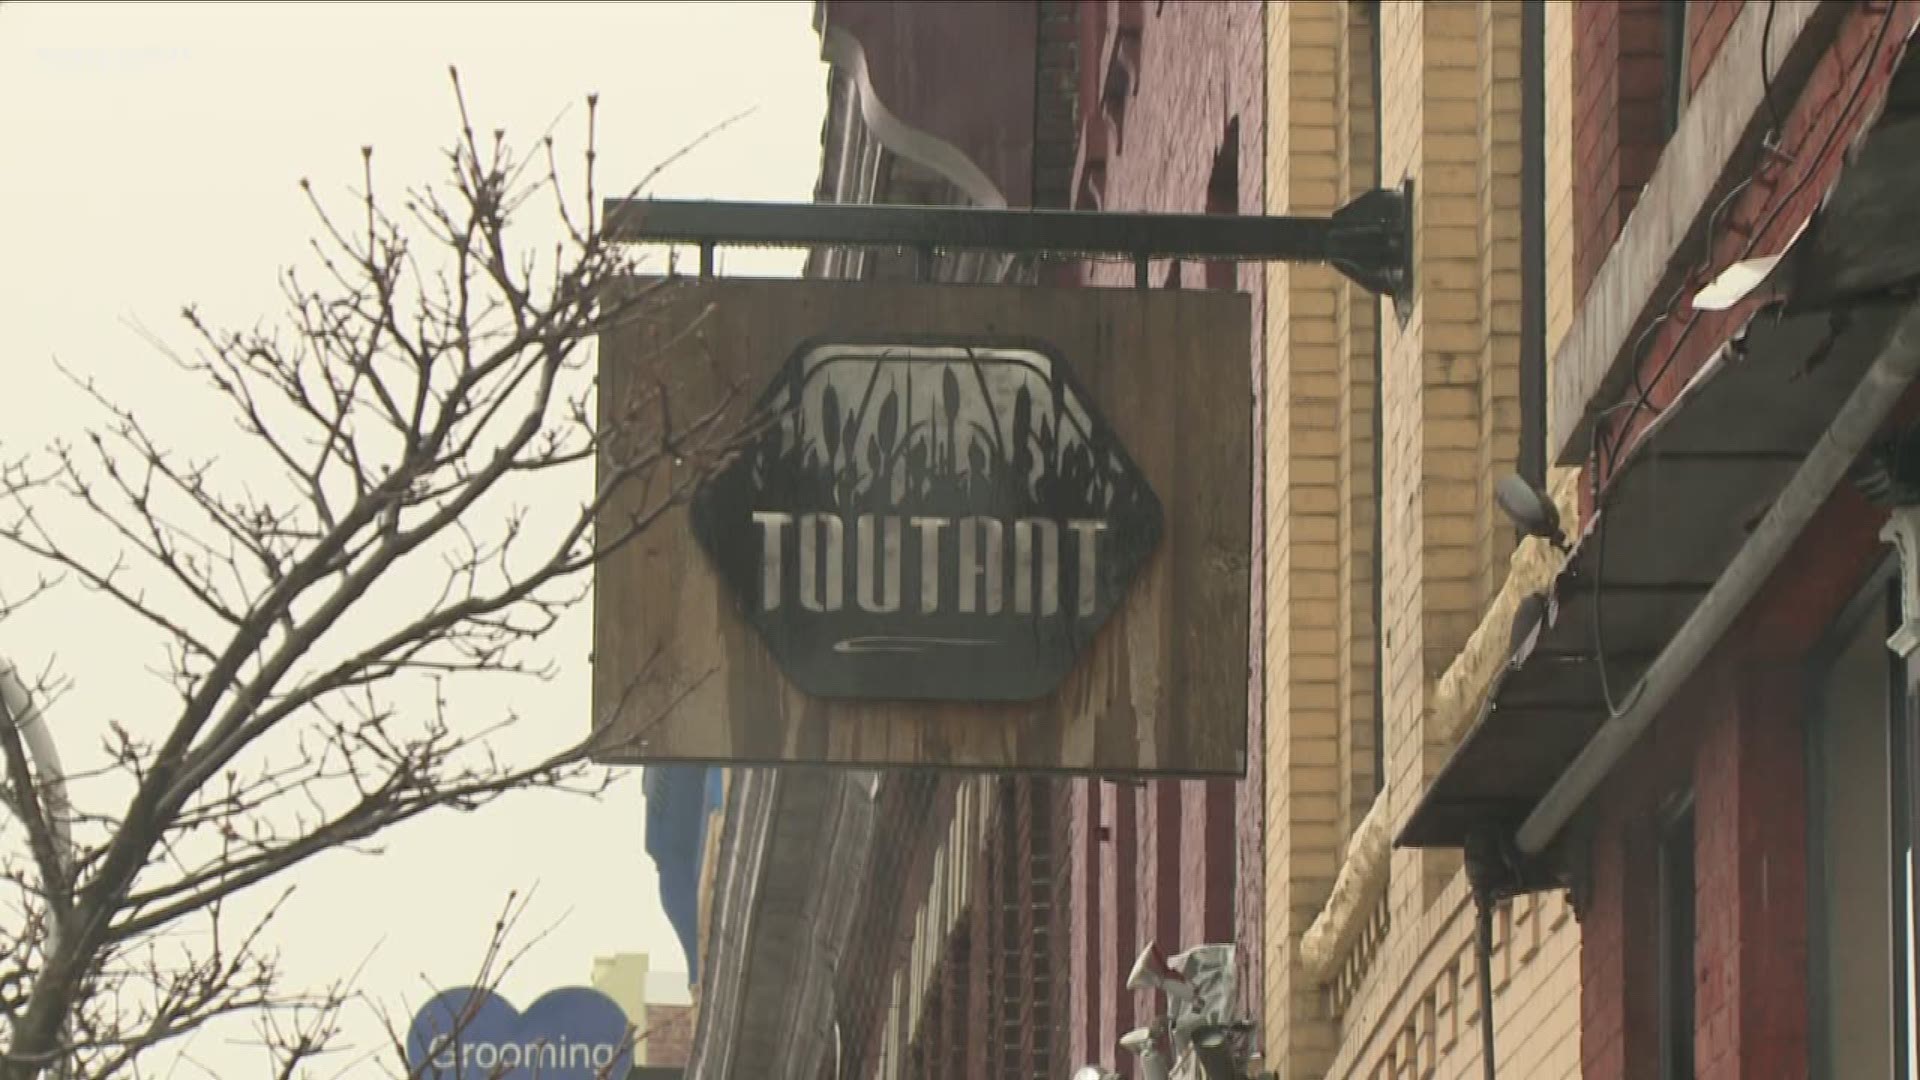 Toutant To Re-Open Thursday After Flooding